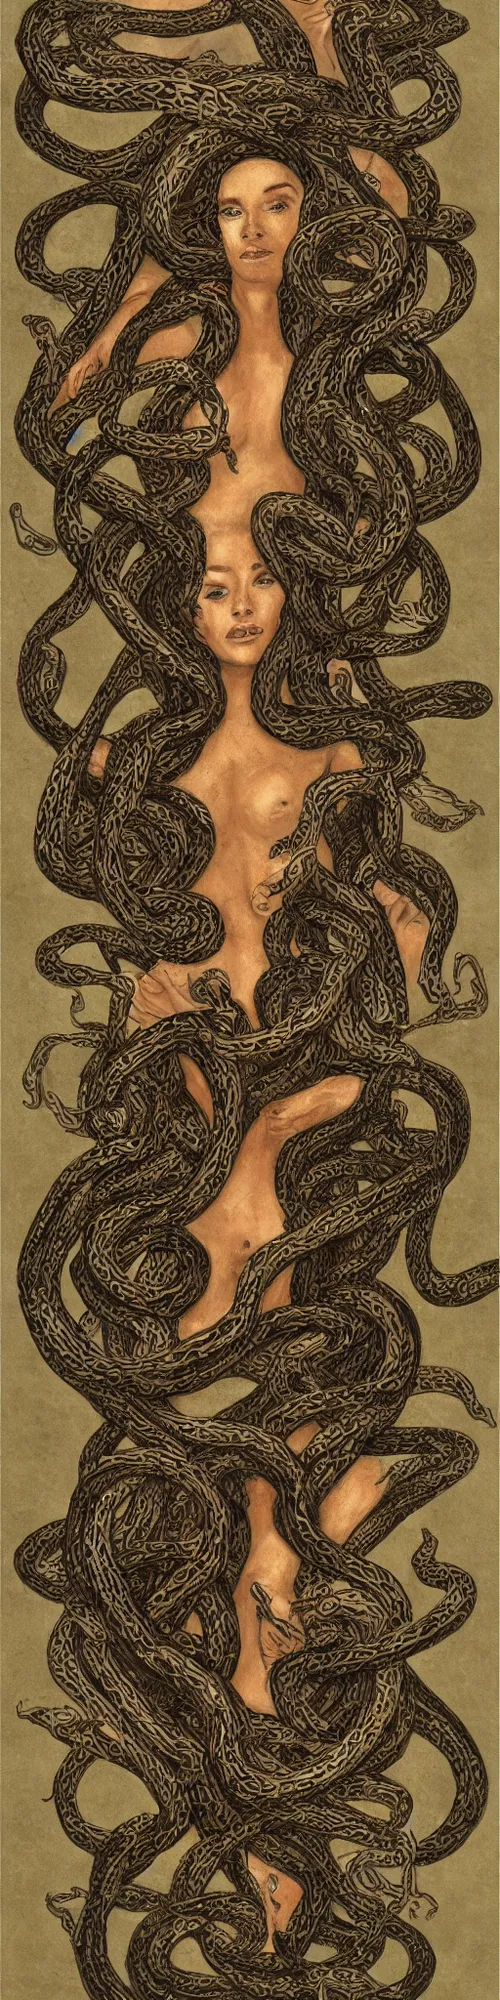 Prompt: full body portrait of a woman made of snakes, fantasy artwork